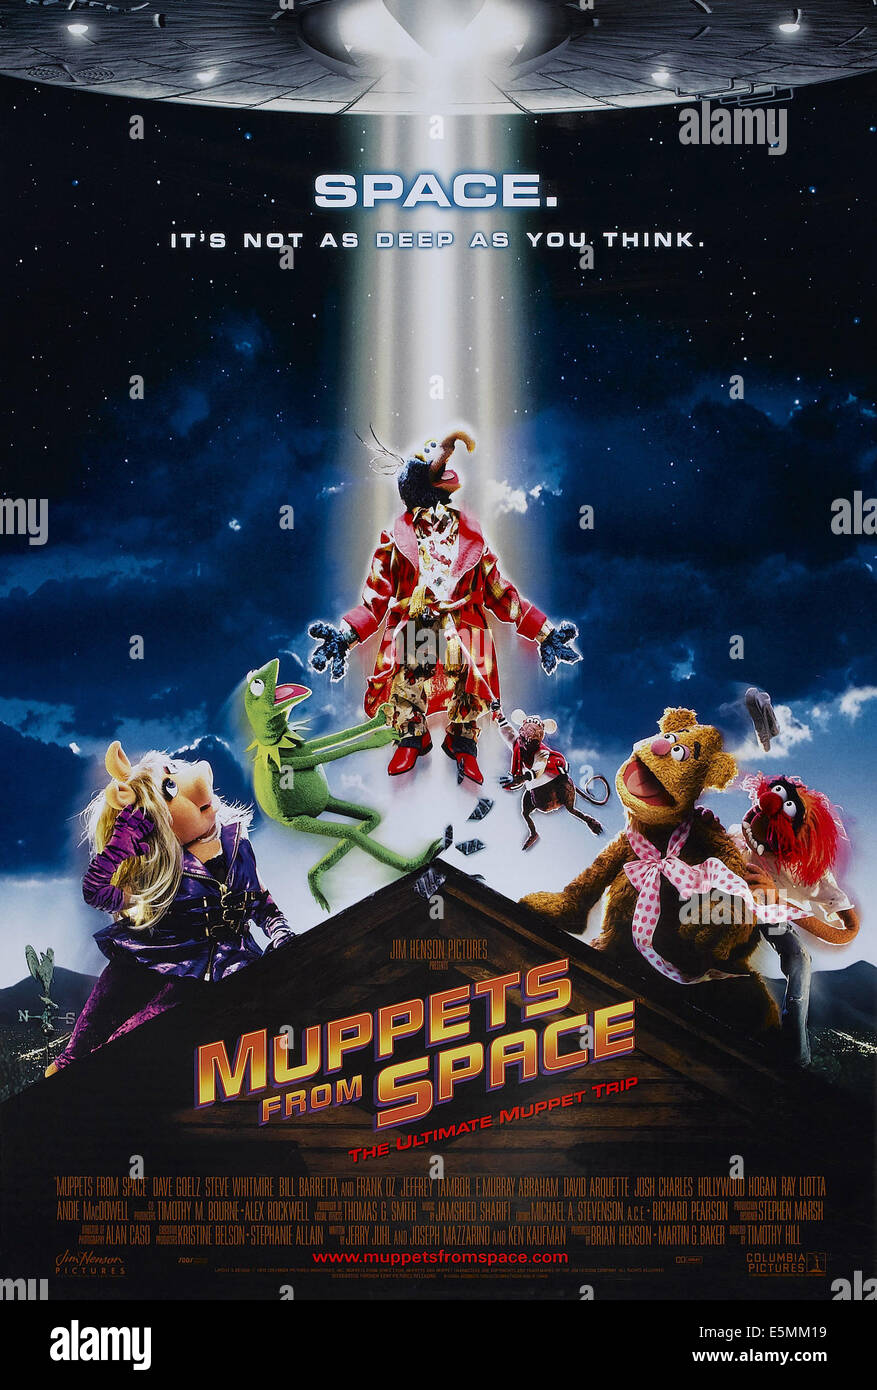 MUPPETS FROM SPACE, US poster art, from left: Miss Piggy, Kermit the Frog, Gonzo, Rizzo the Rat, Fozzie Bear, Animal, 1999, © Stock Photo